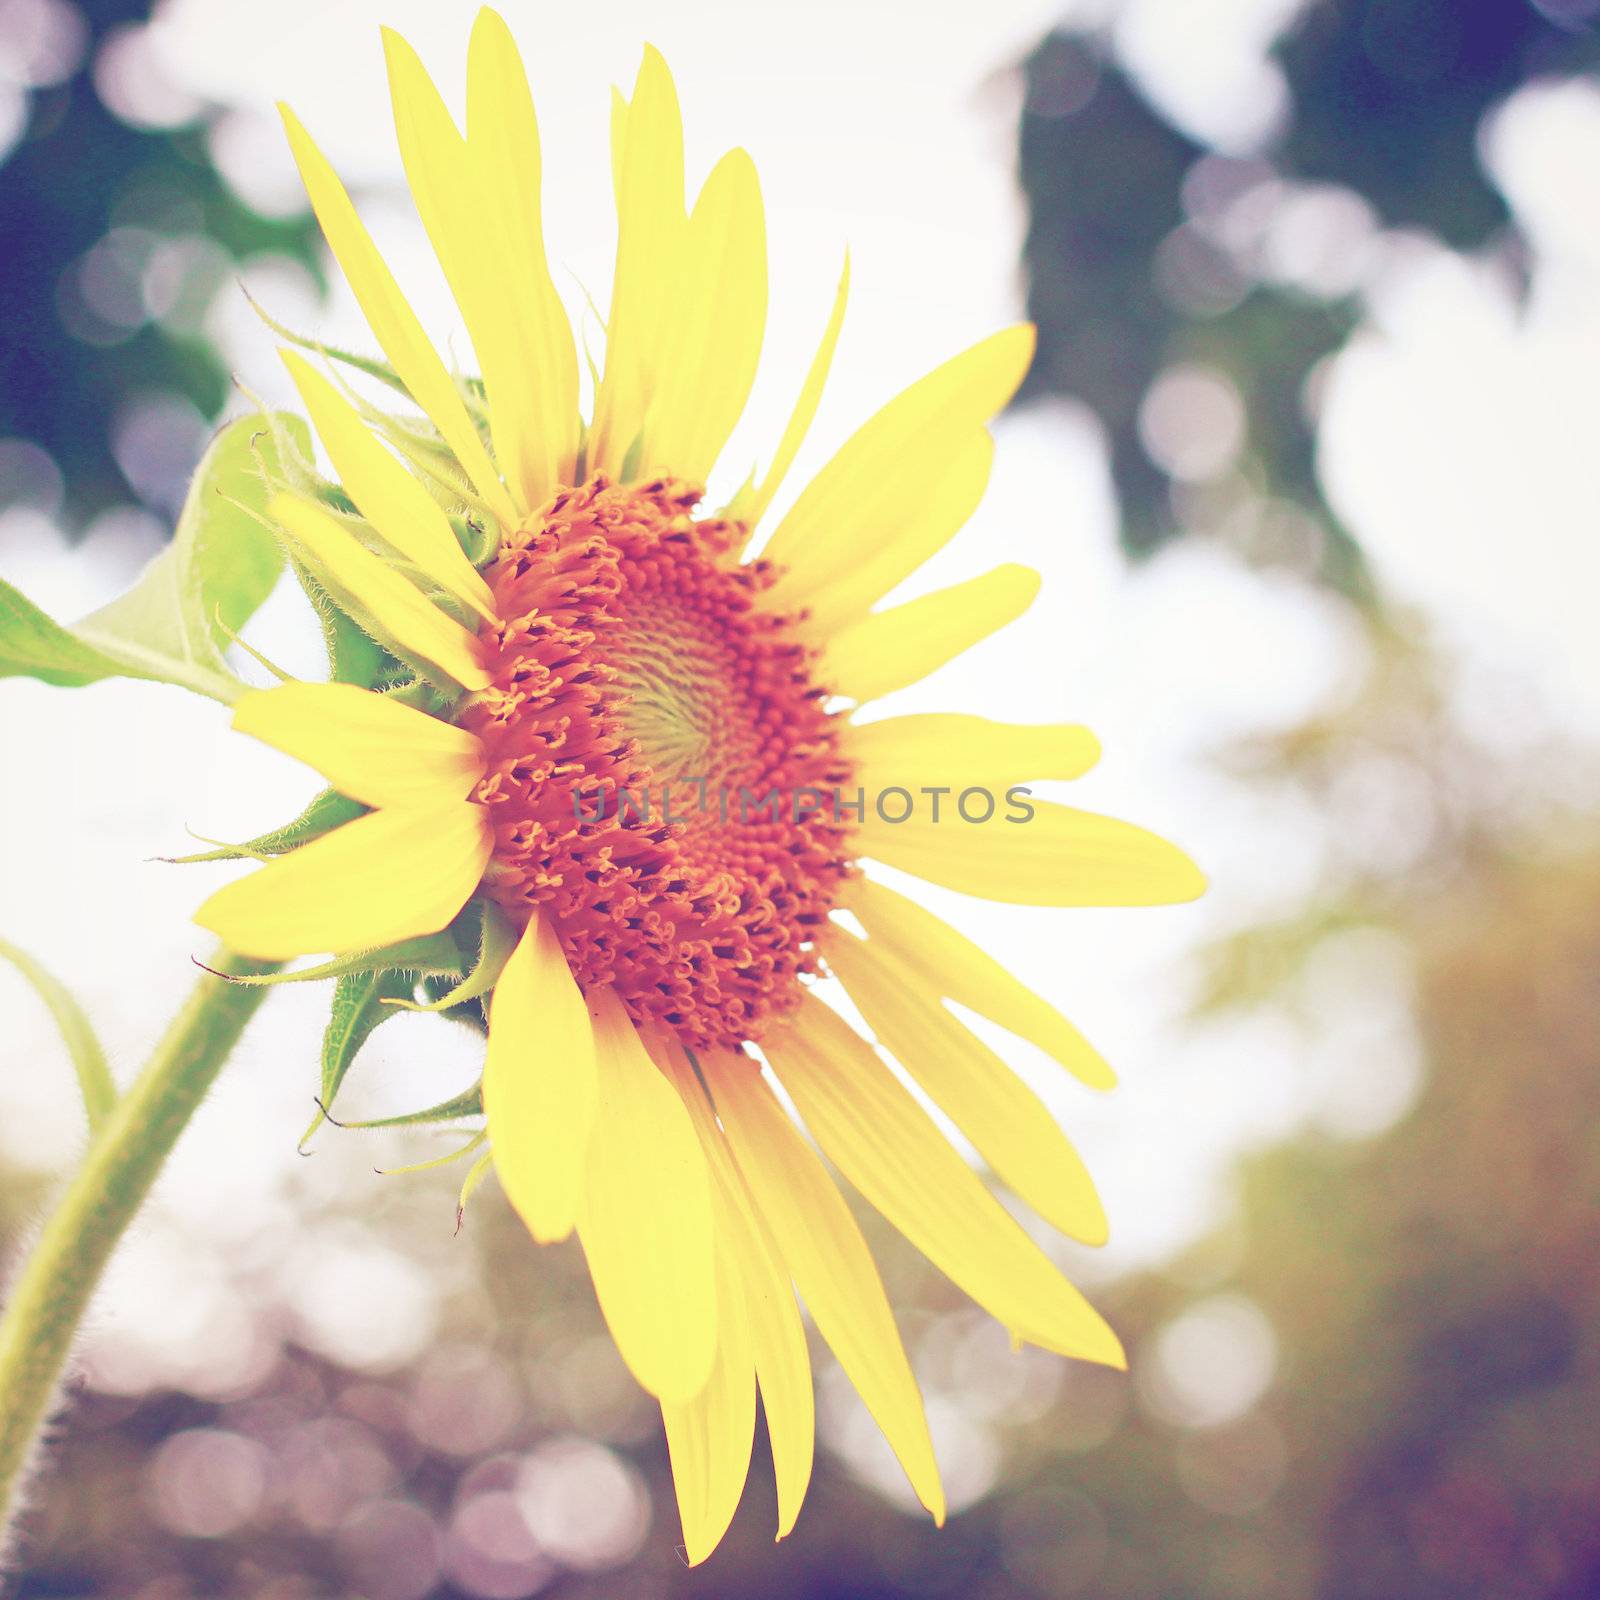 Close-up of sun flower with retro filter effect